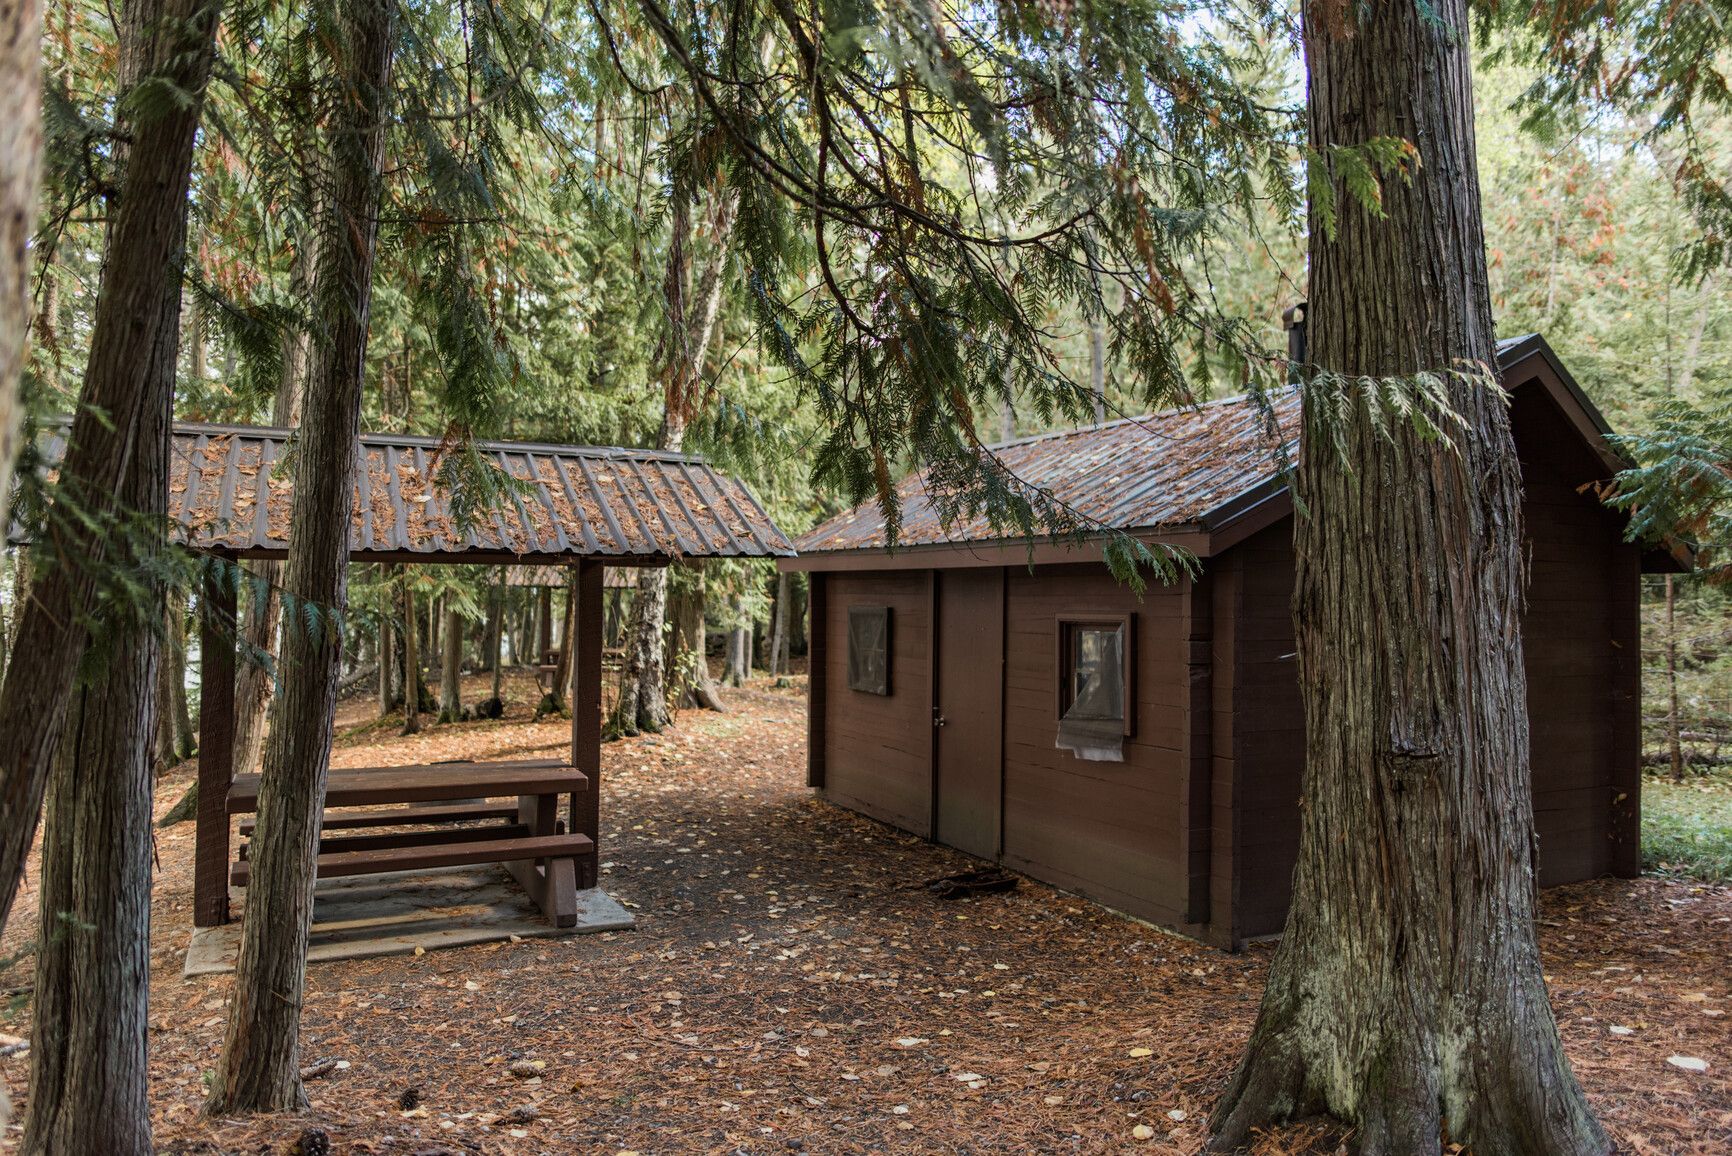 There are two shelters located in the park available on a first come first served basis. Cinnemousun Narrows Park.